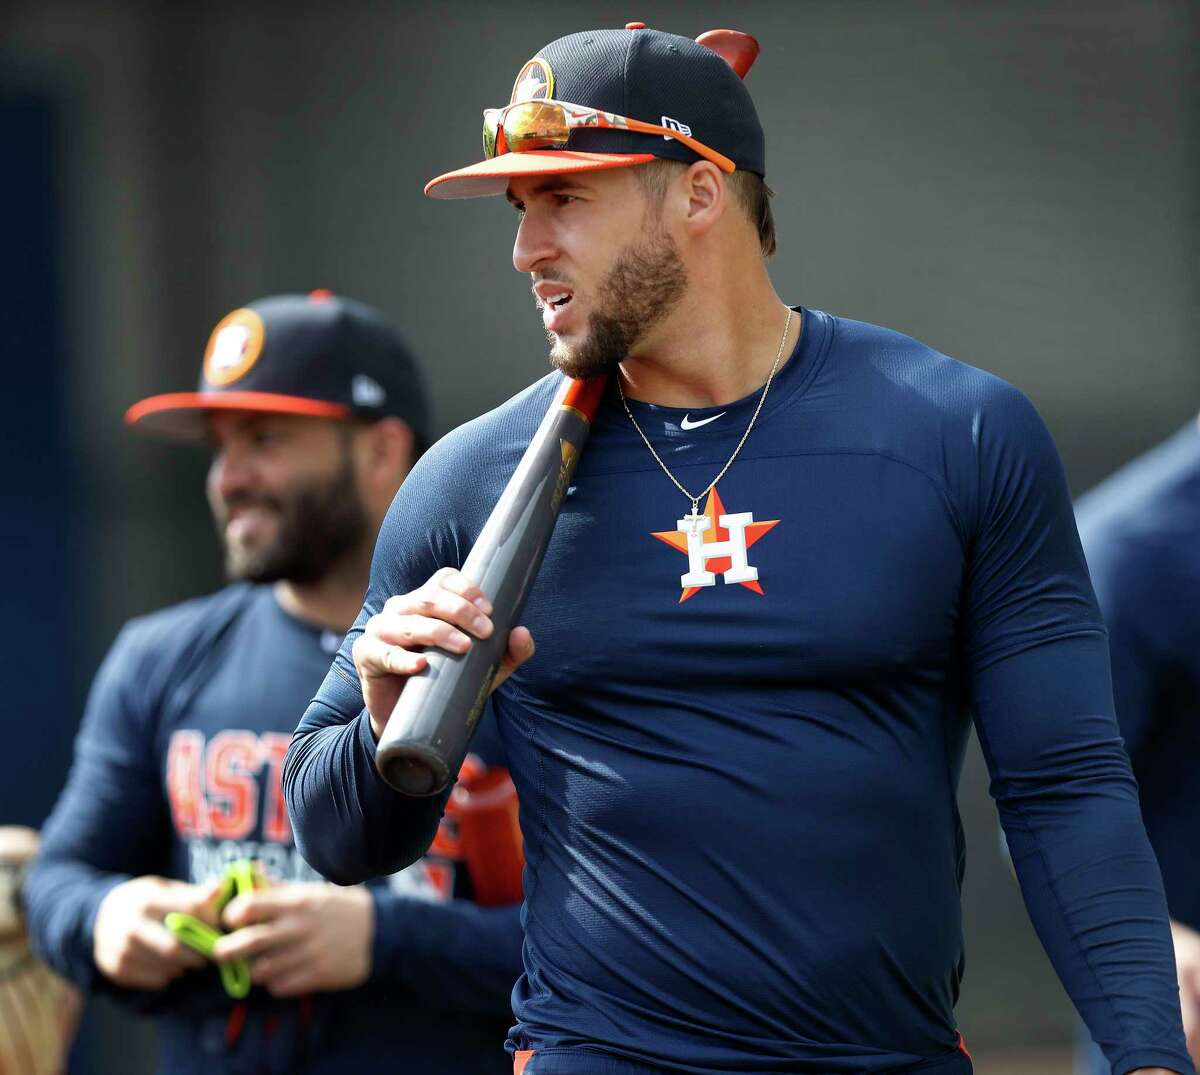 George Springer, who hopes to pick up tips from veteran outfielder Carlos Beltran this season, carries his bat to work to join the rest of the early-to-camp position players Thursday in West Palm Beach, Fla.